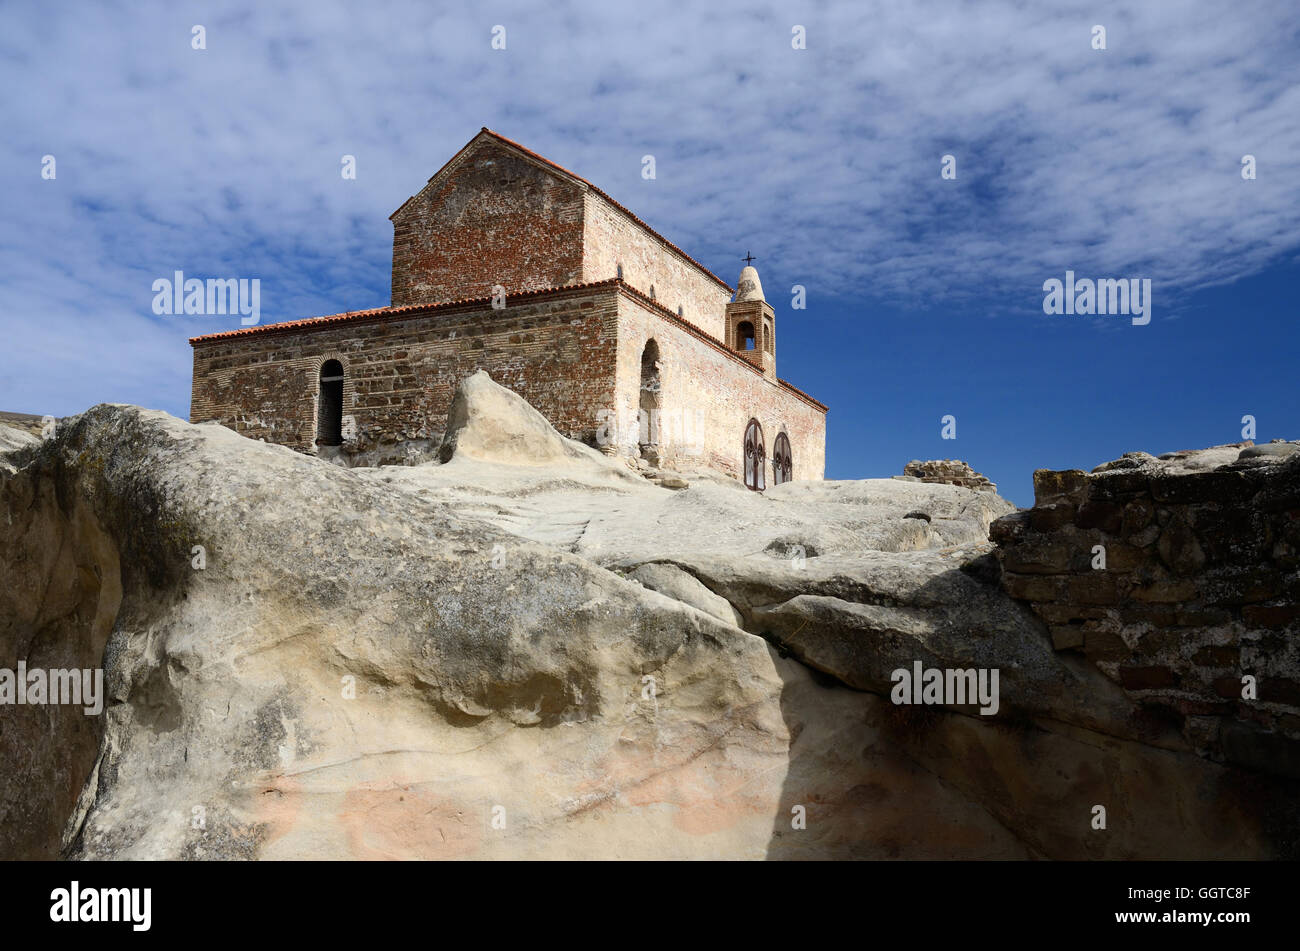 Ancient three-nave basilica of 9th-10th century in medieval cave town Uplistsikhe,eastern Georgia,Caucasus,Central Asia Stock Photo